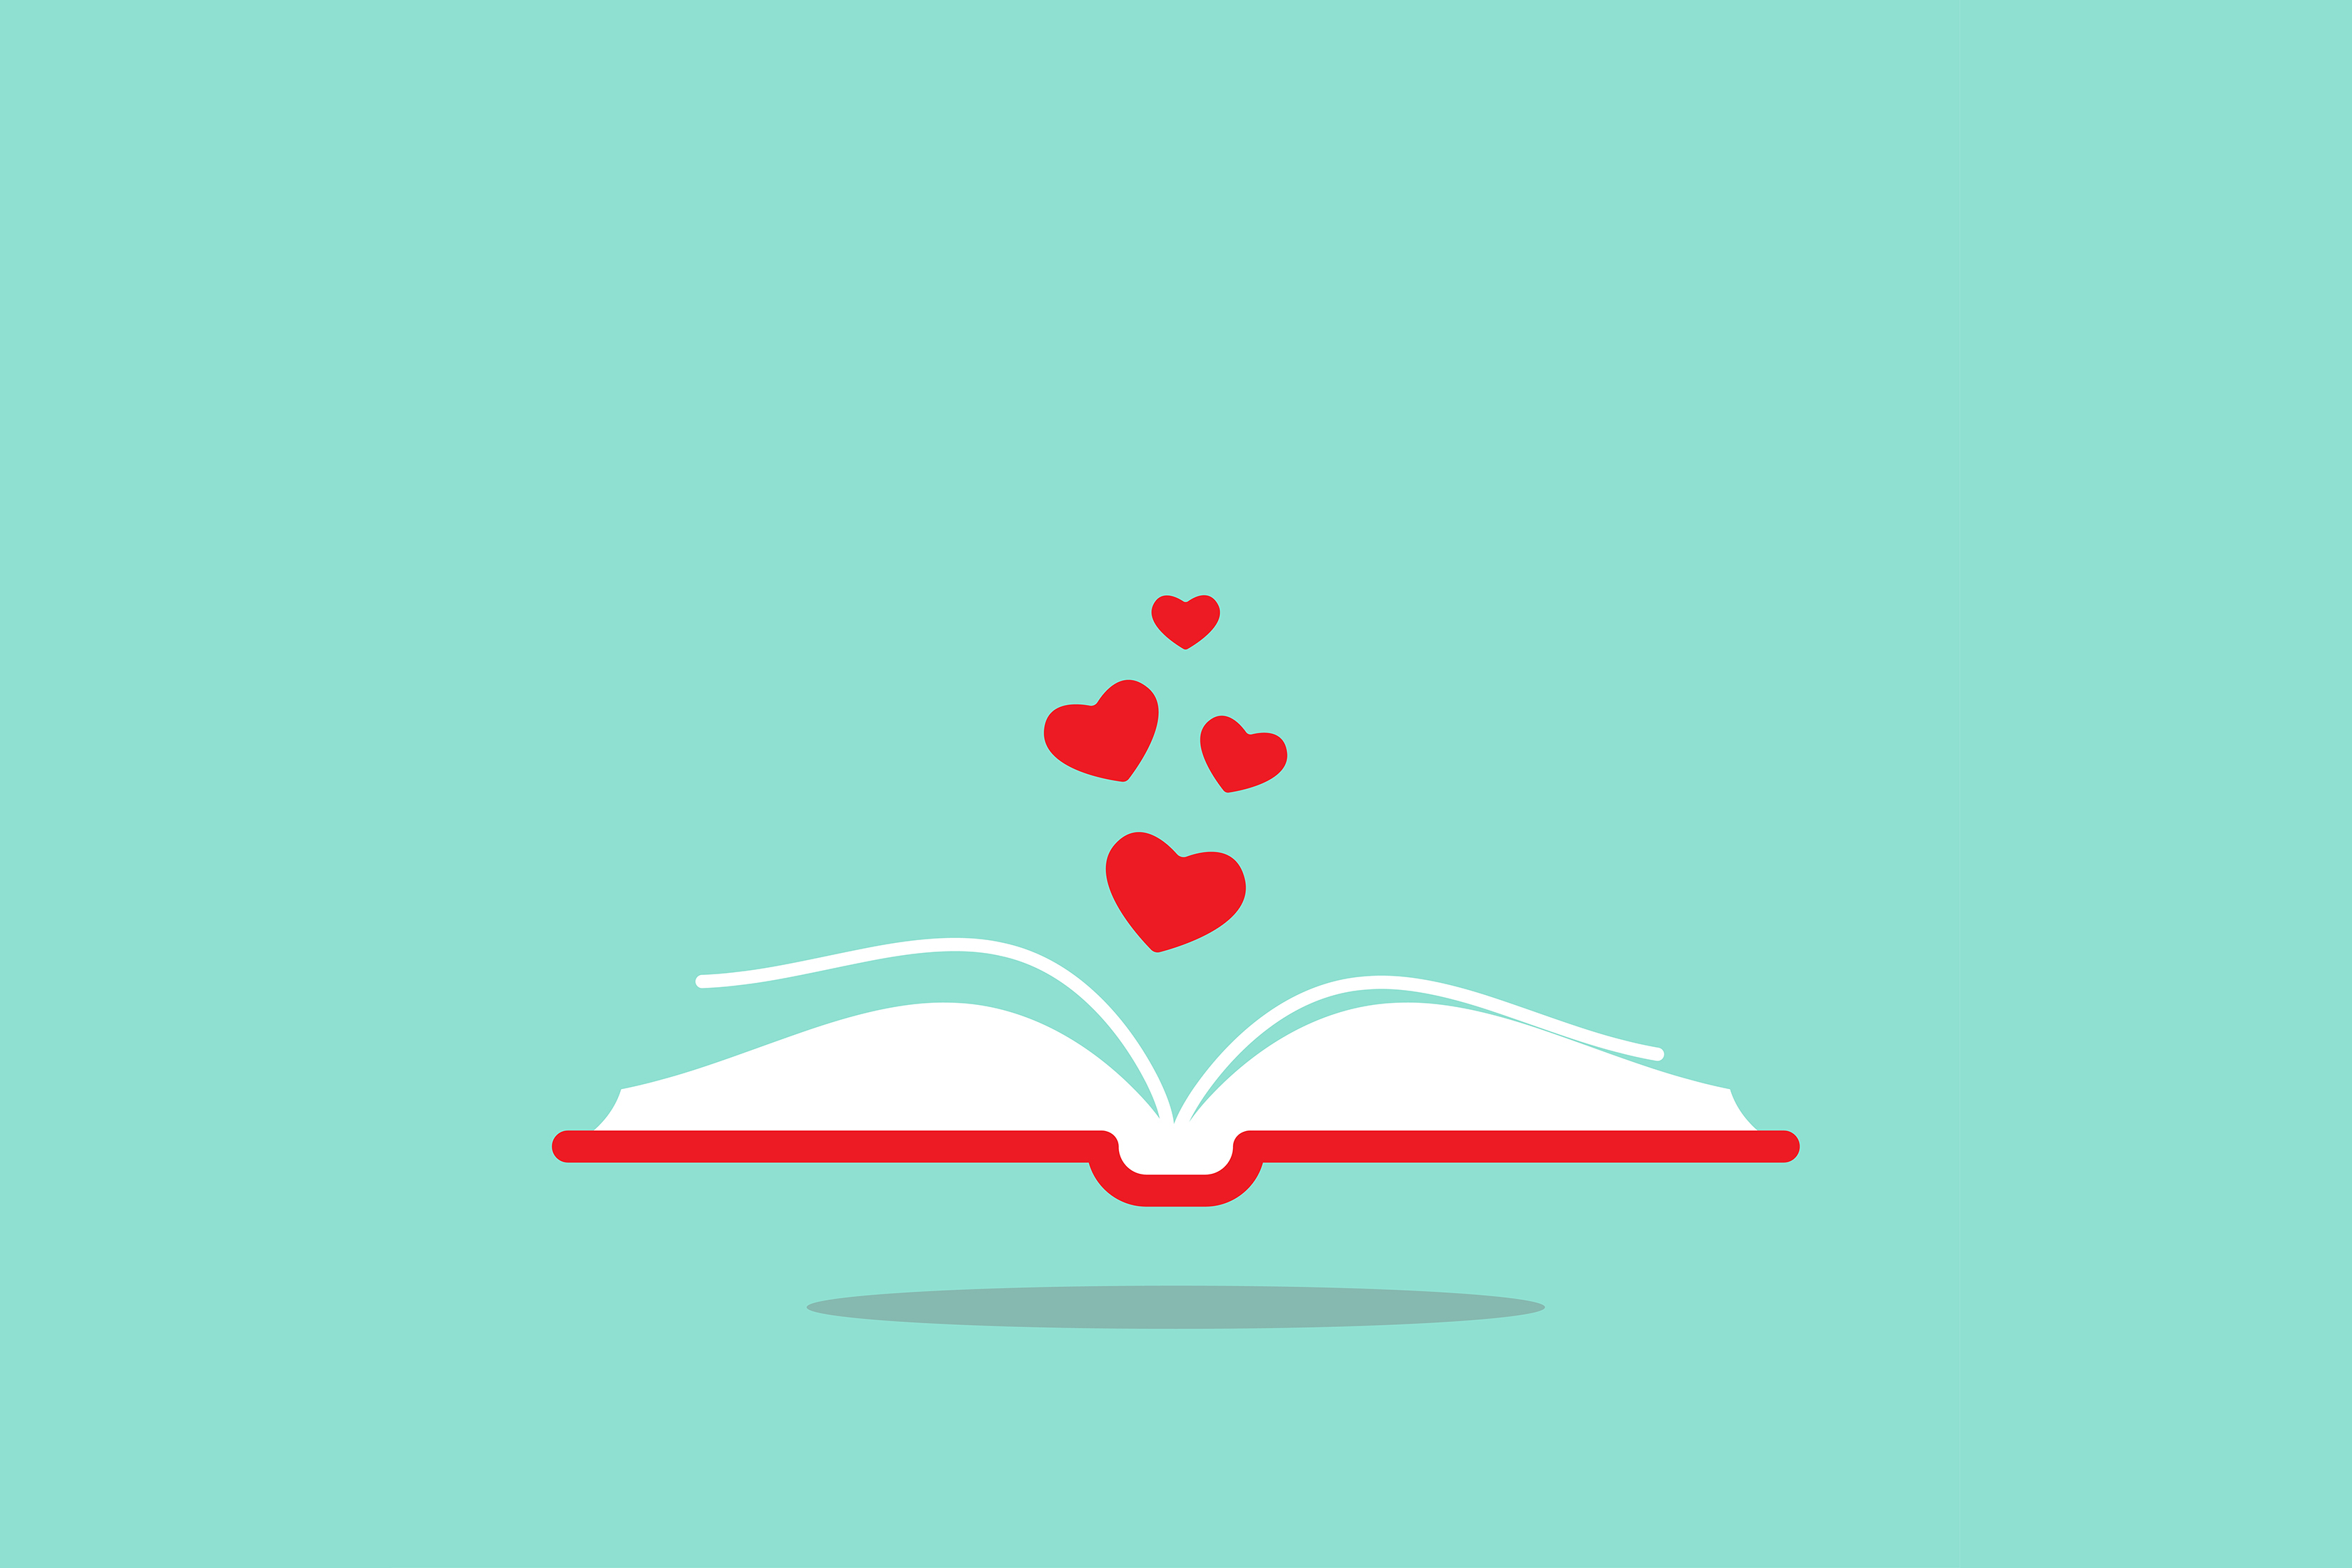 An illustration of an open book with hearts rising from it.